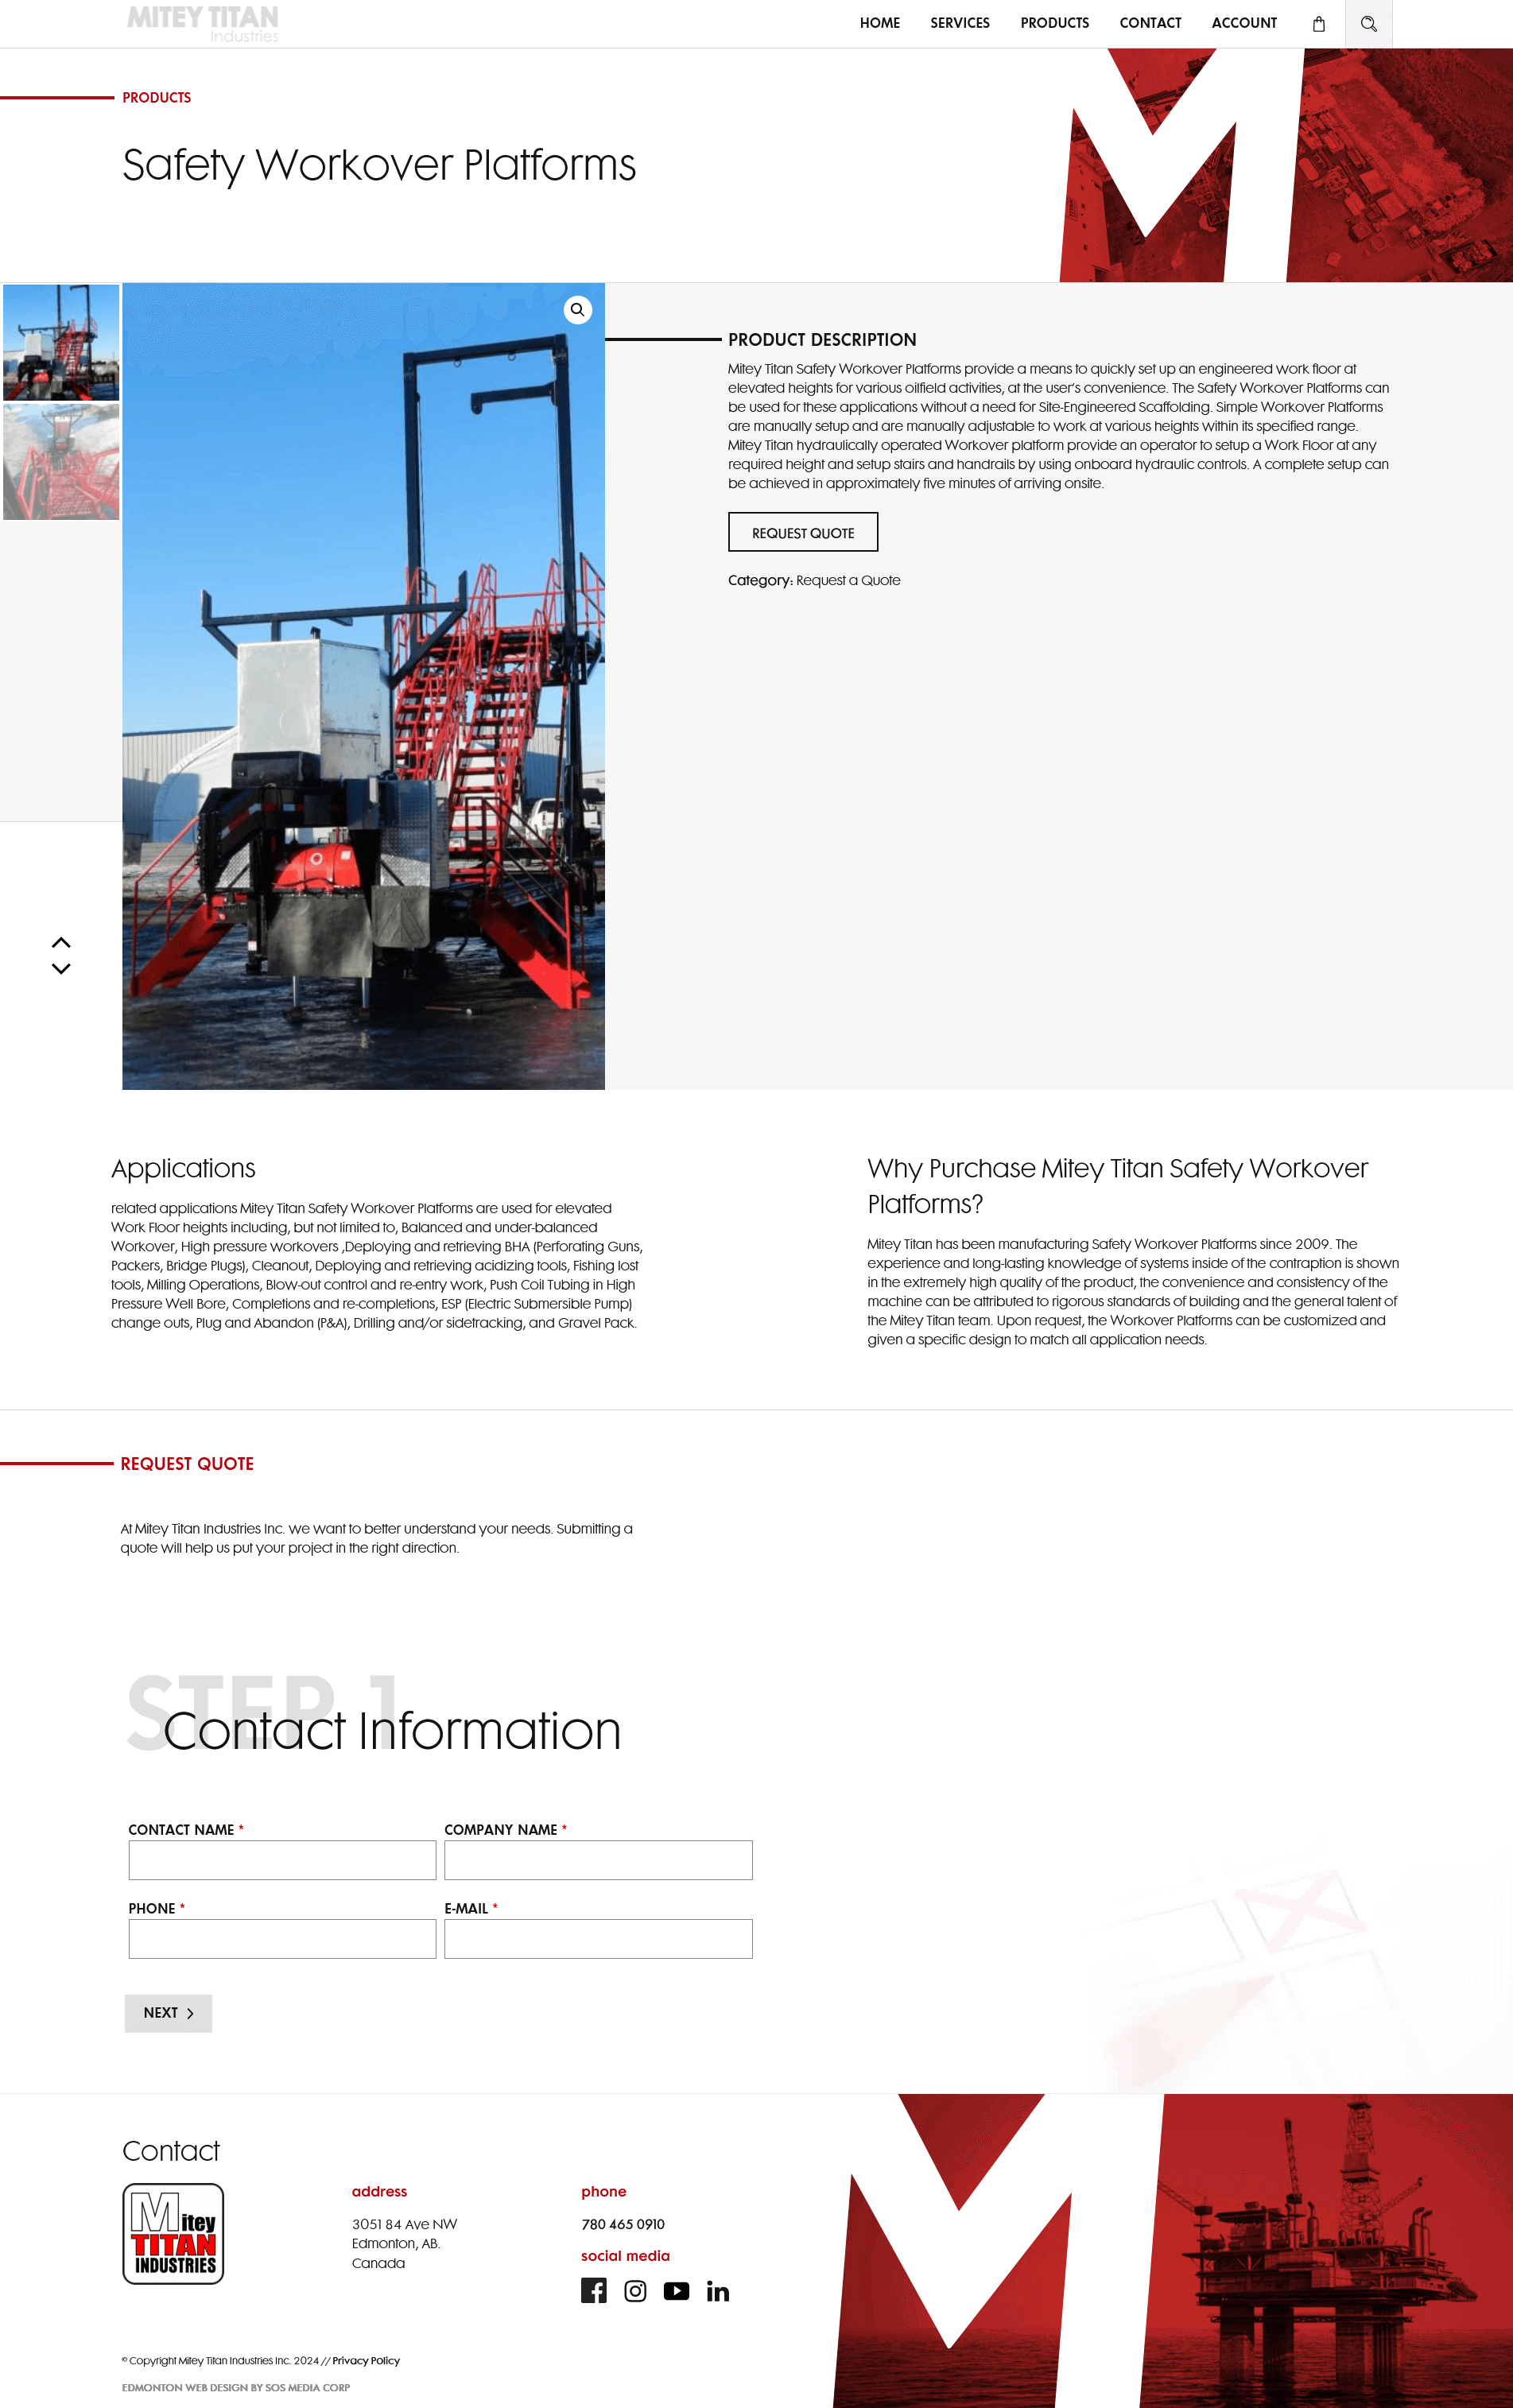 Mitey Titan's custom product 'request a quote' form.